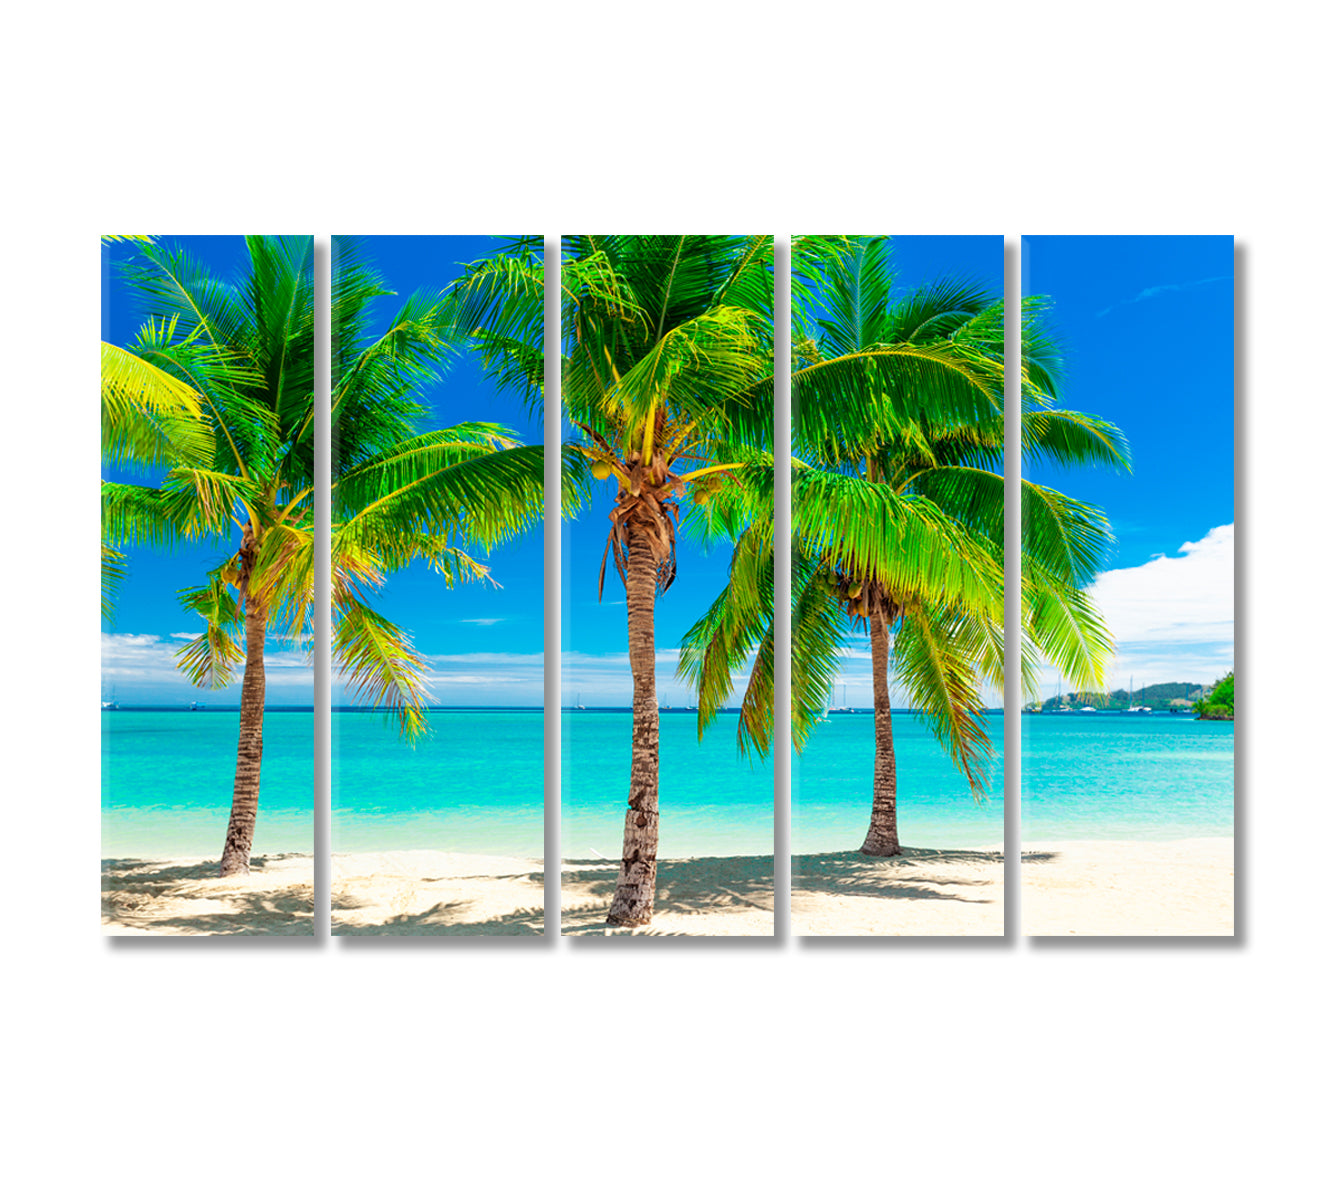 Tropical Beach with Coconut Palm Trees Canvas Print-Canvas Print-CetArt-5 Panels-36x24 inches-CetArt